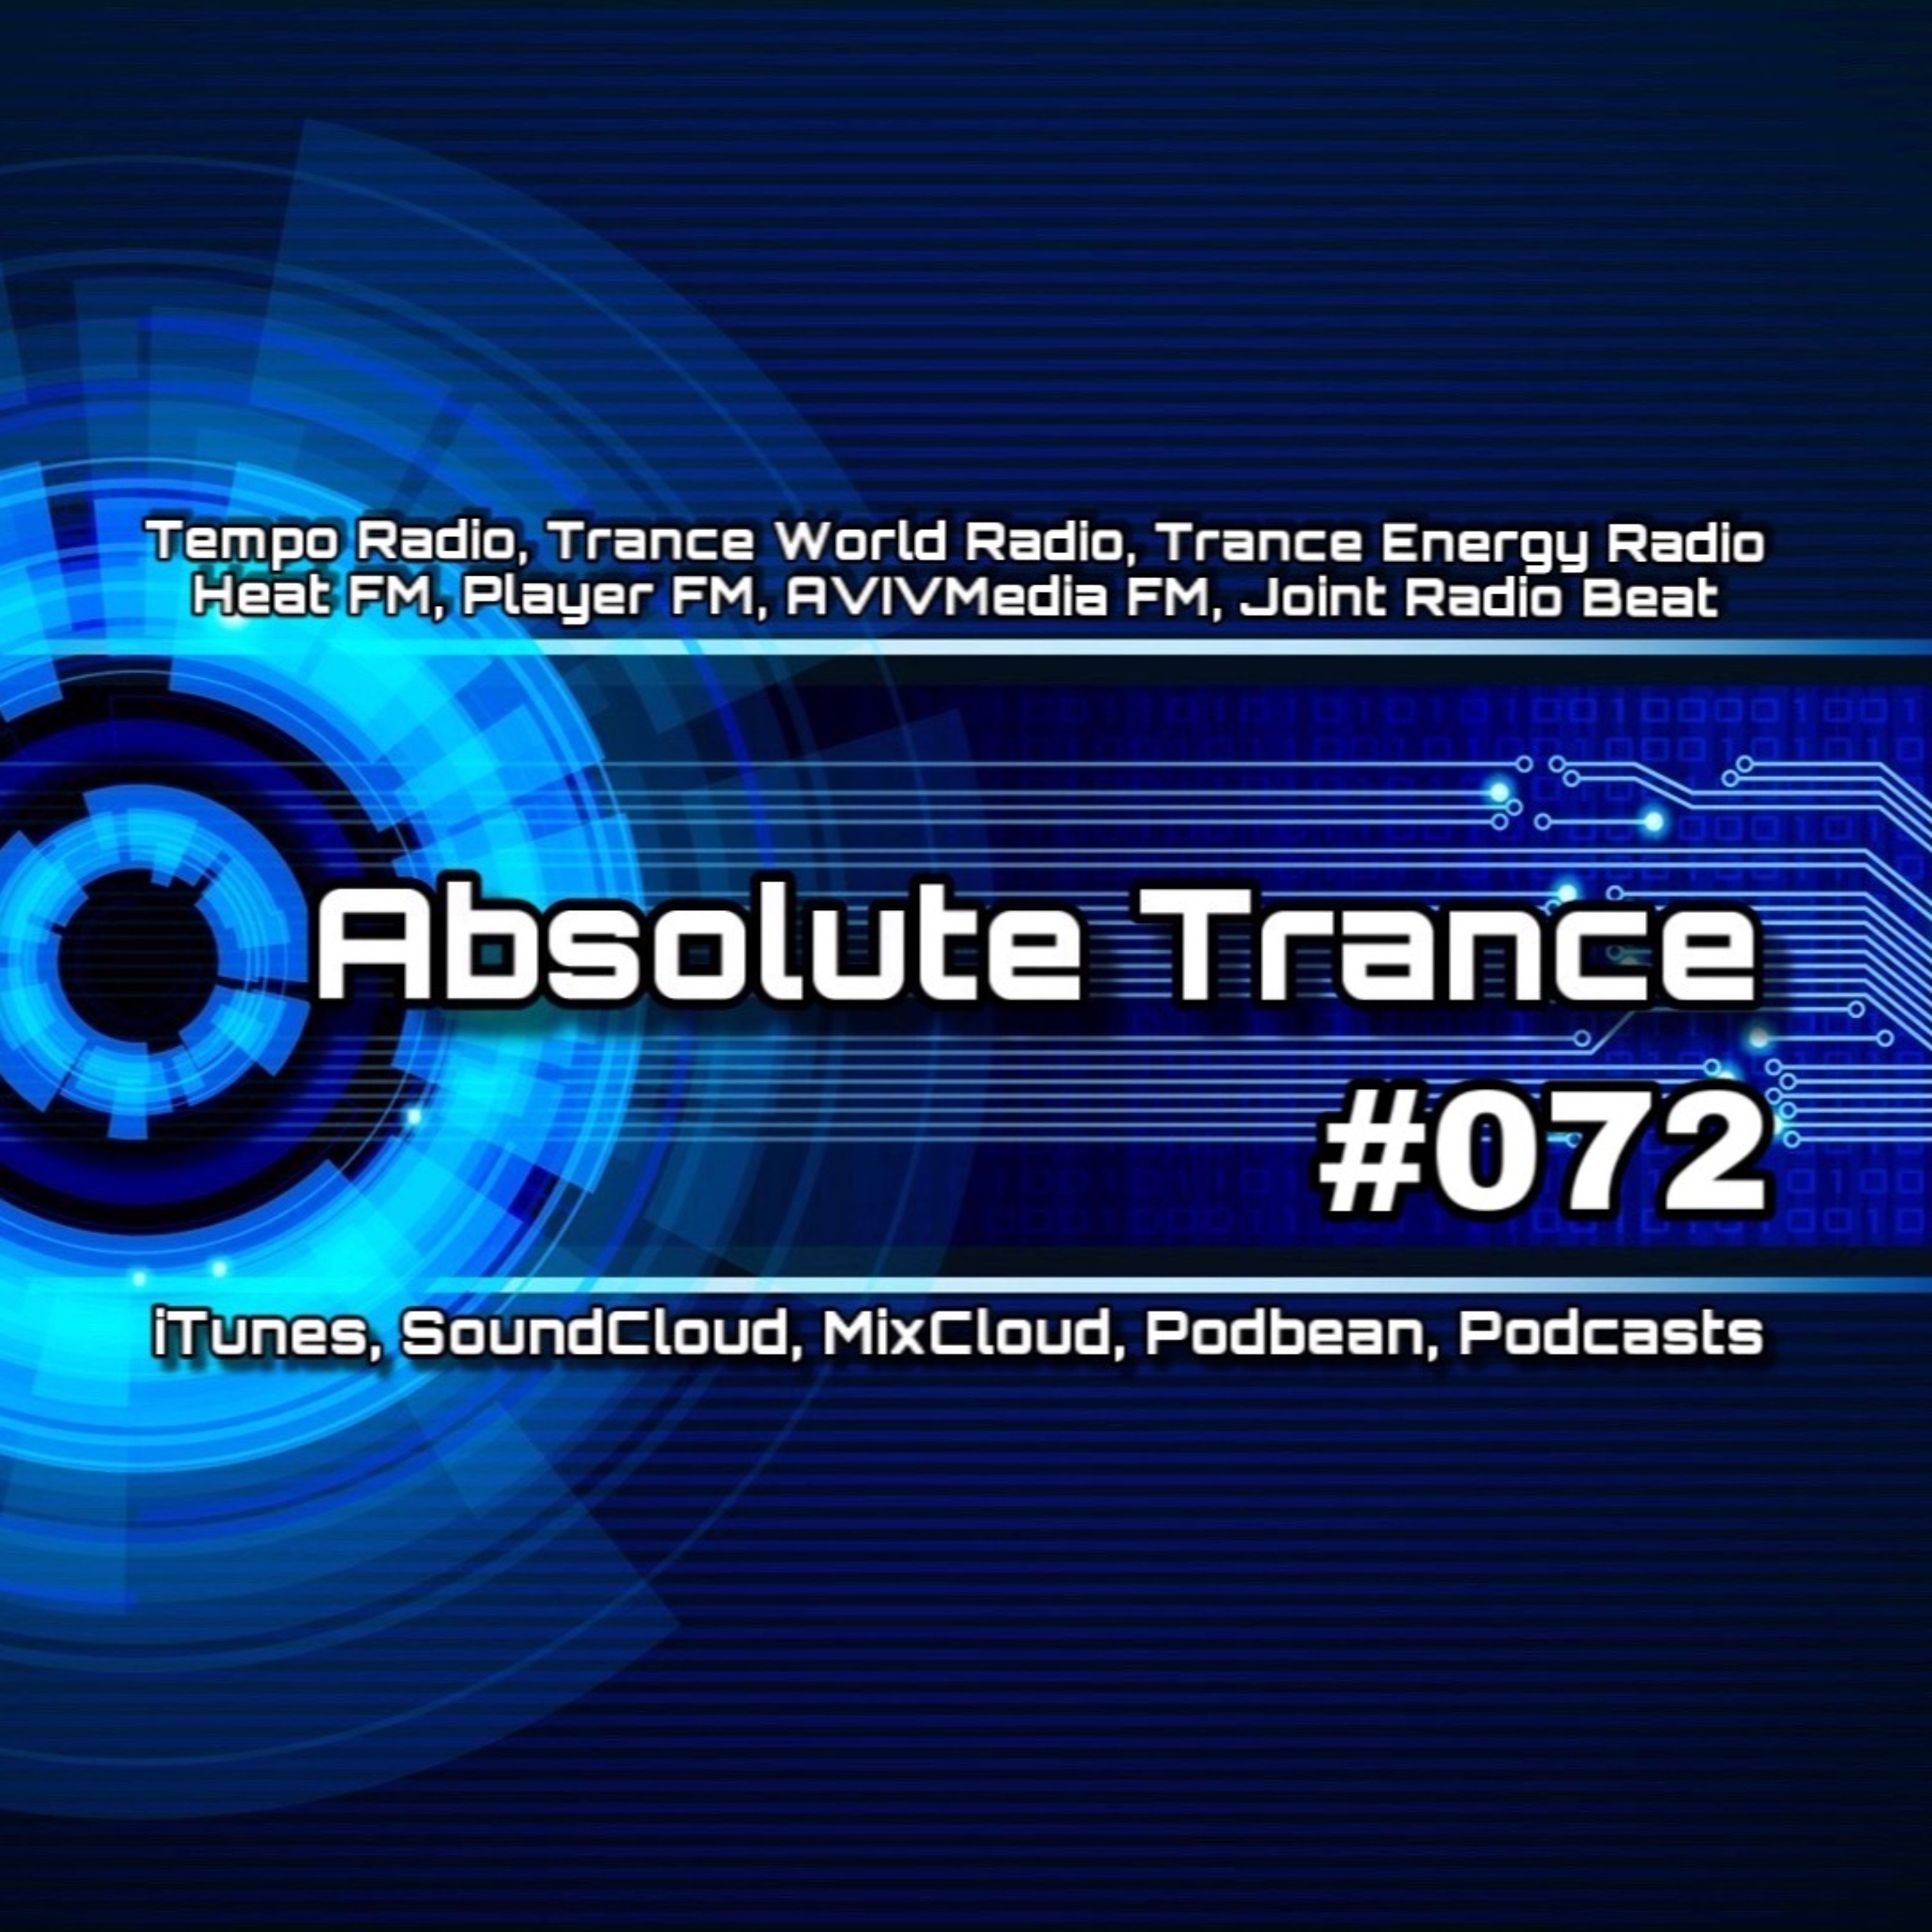 Absolute Trance #072